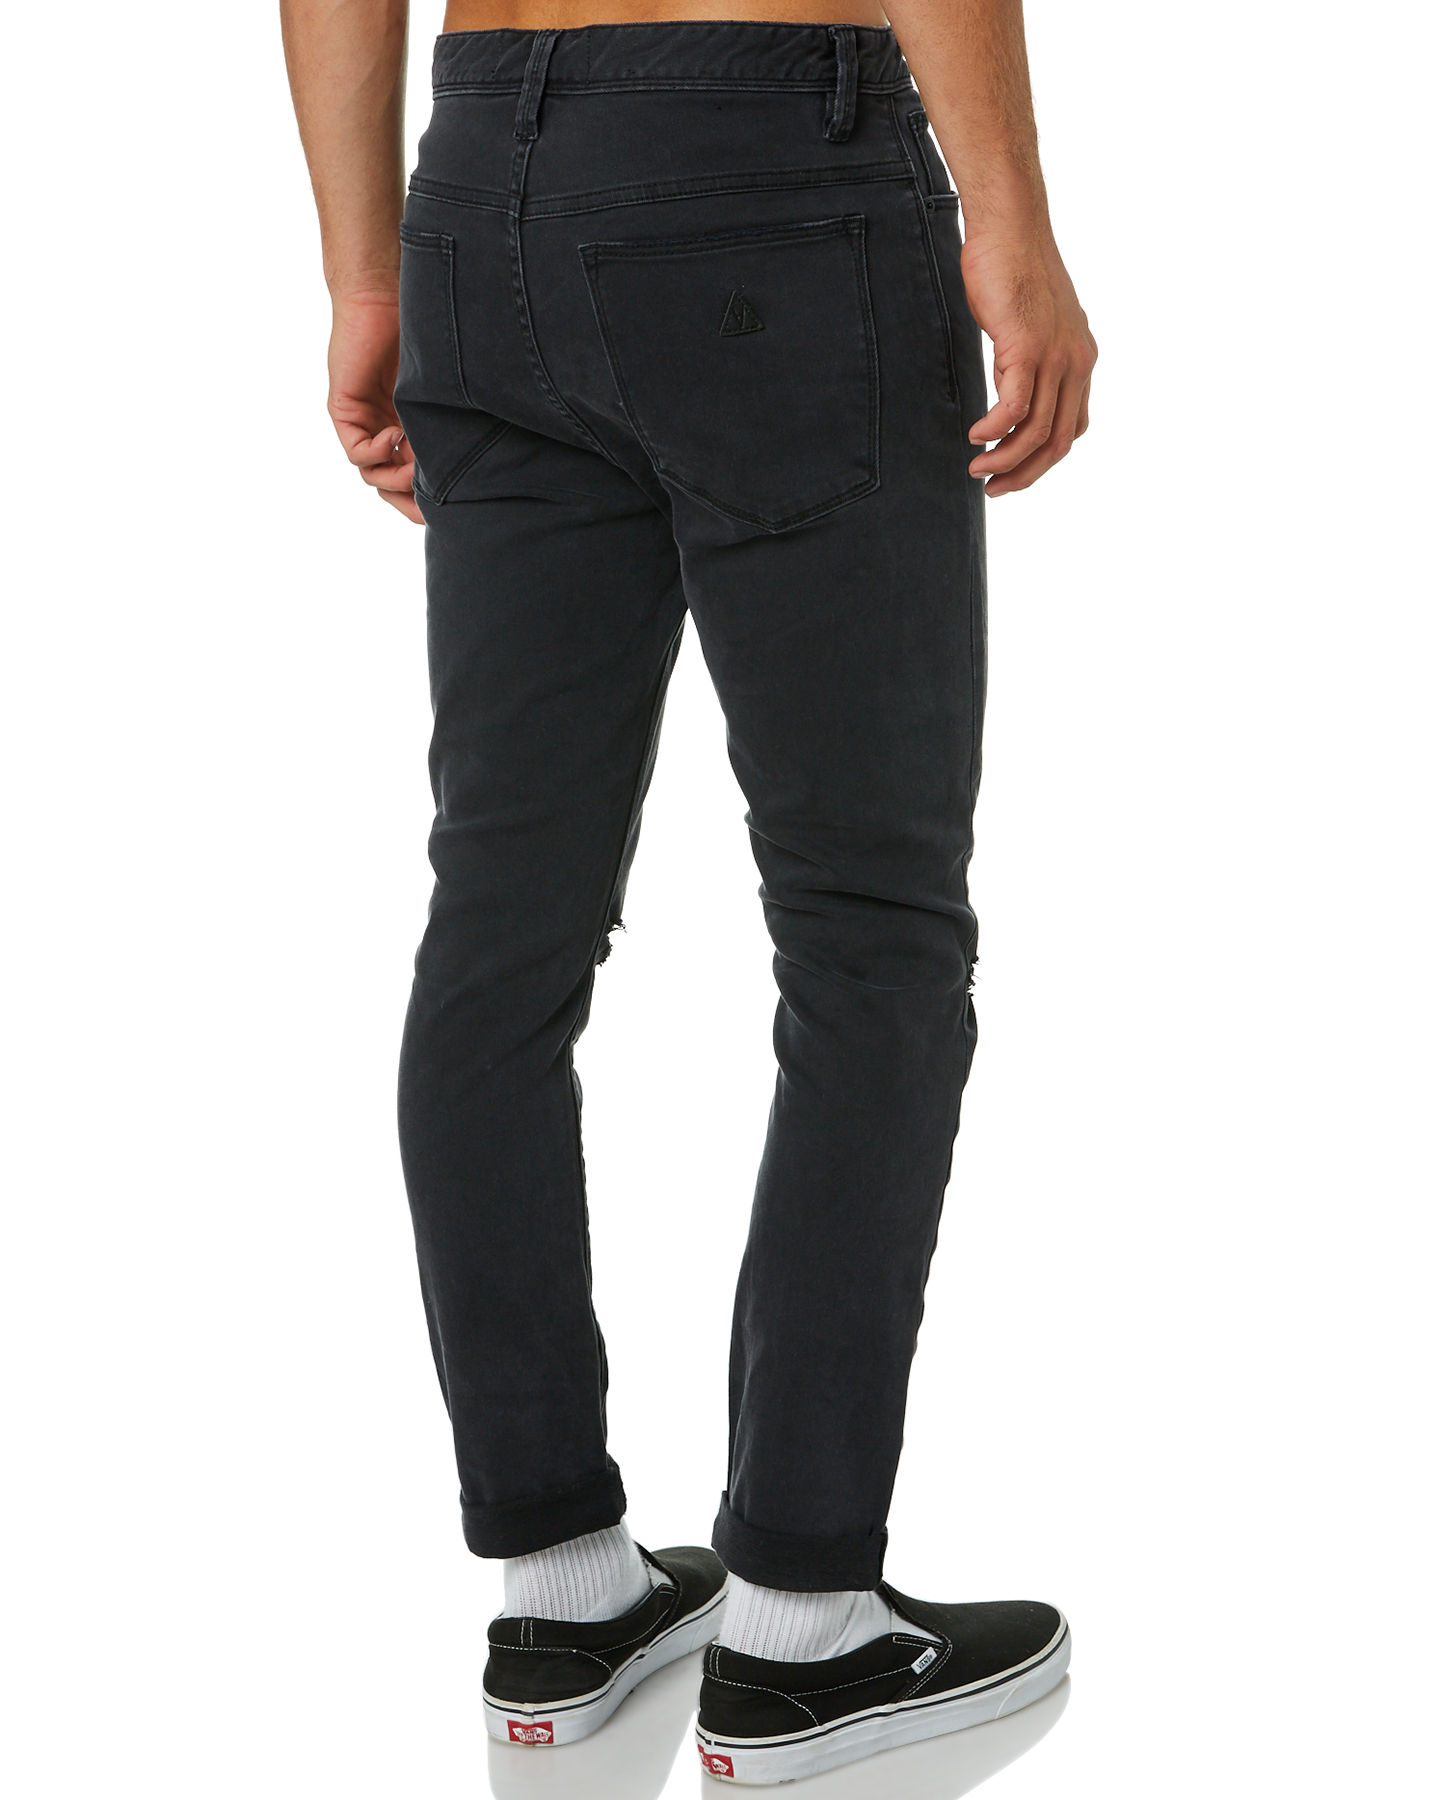 Abrand A Dropped Slim Turn Up Mens Jean - Smoked | SurfStitch